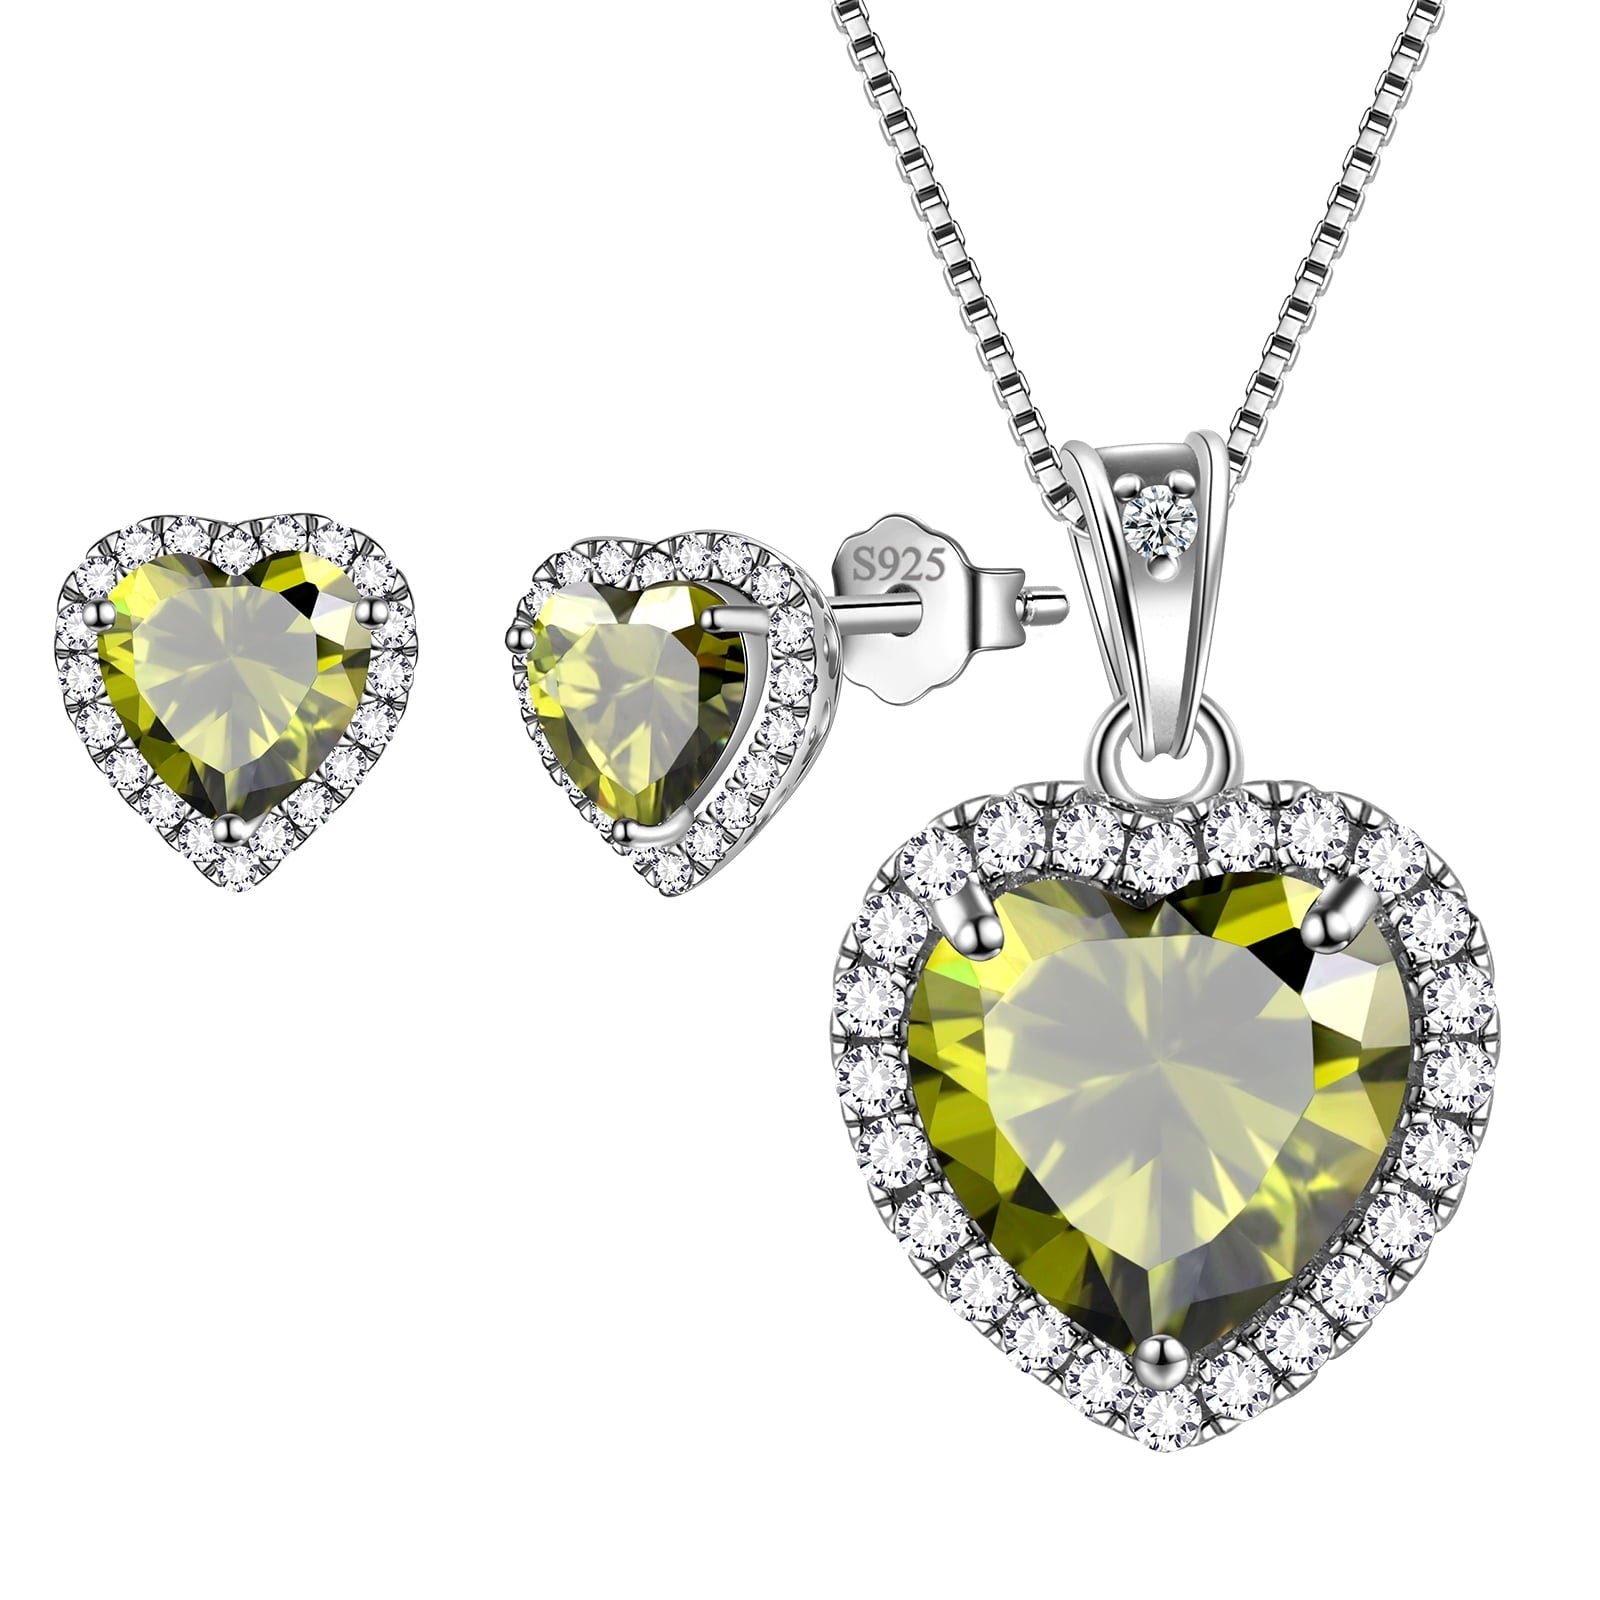 August Birthstone Jewelry Sets for Women, Peridot Heart Jewelry Set Necklace Earrings 925 Sterling Silver Jewelry Girls Wedding Birthday Valentine's Day Gifts